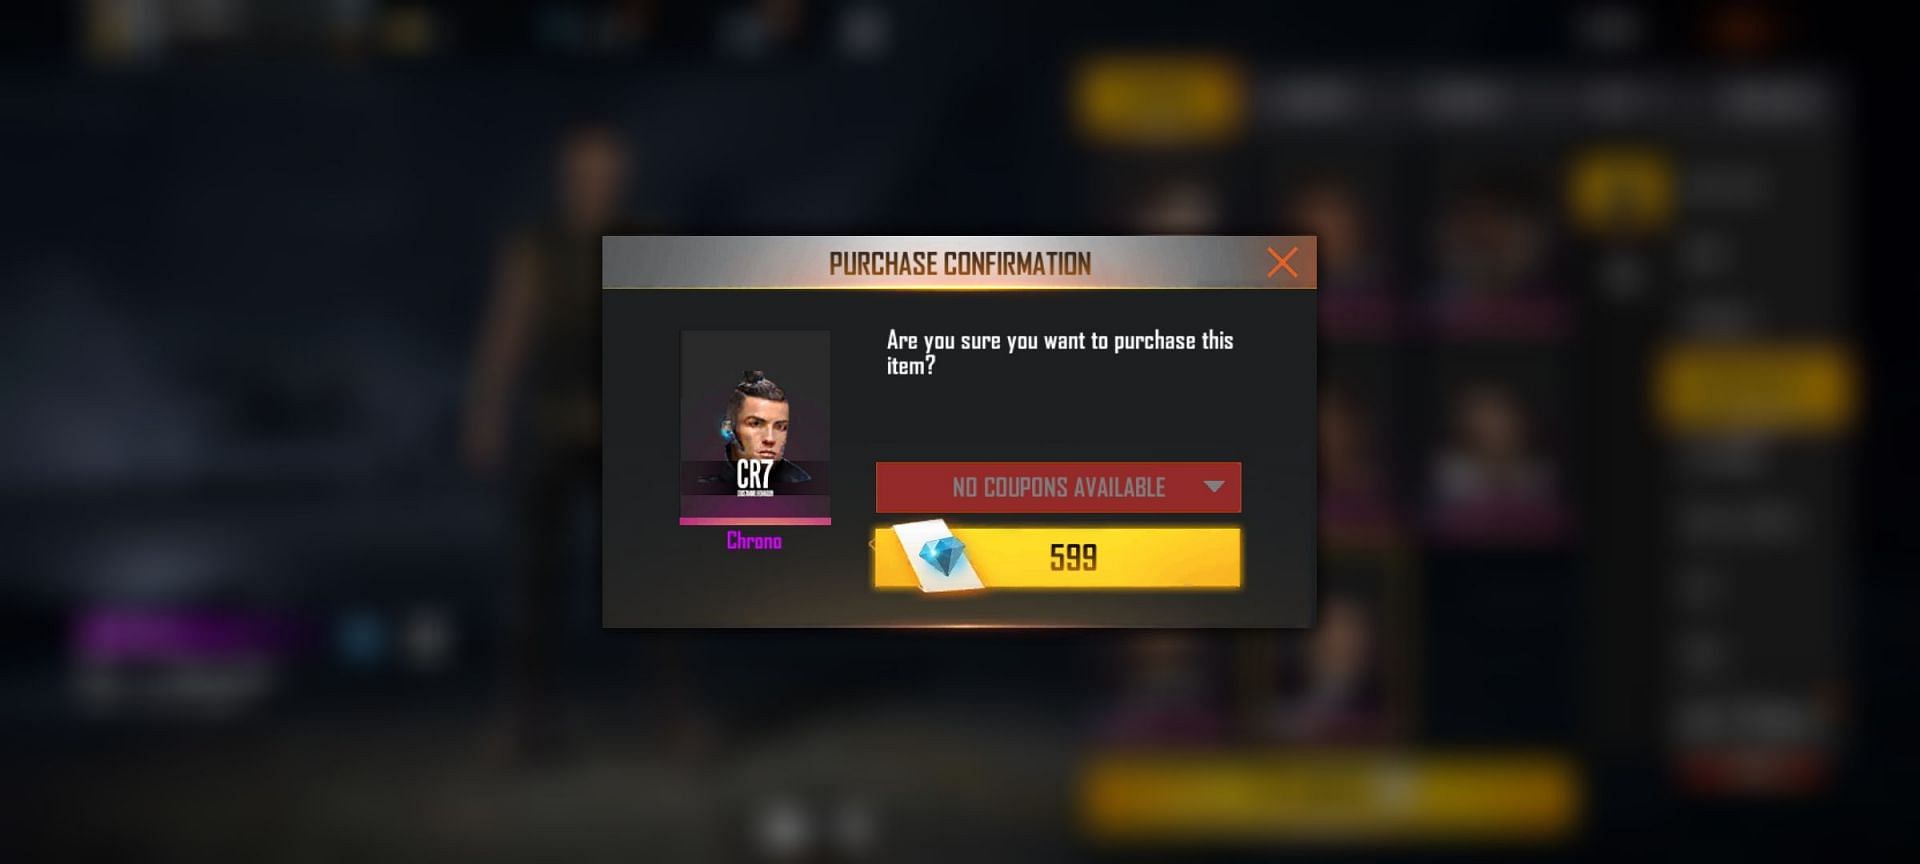 The purchase can finally be completed to receive Chrono in Free Fire (Image via Garena)